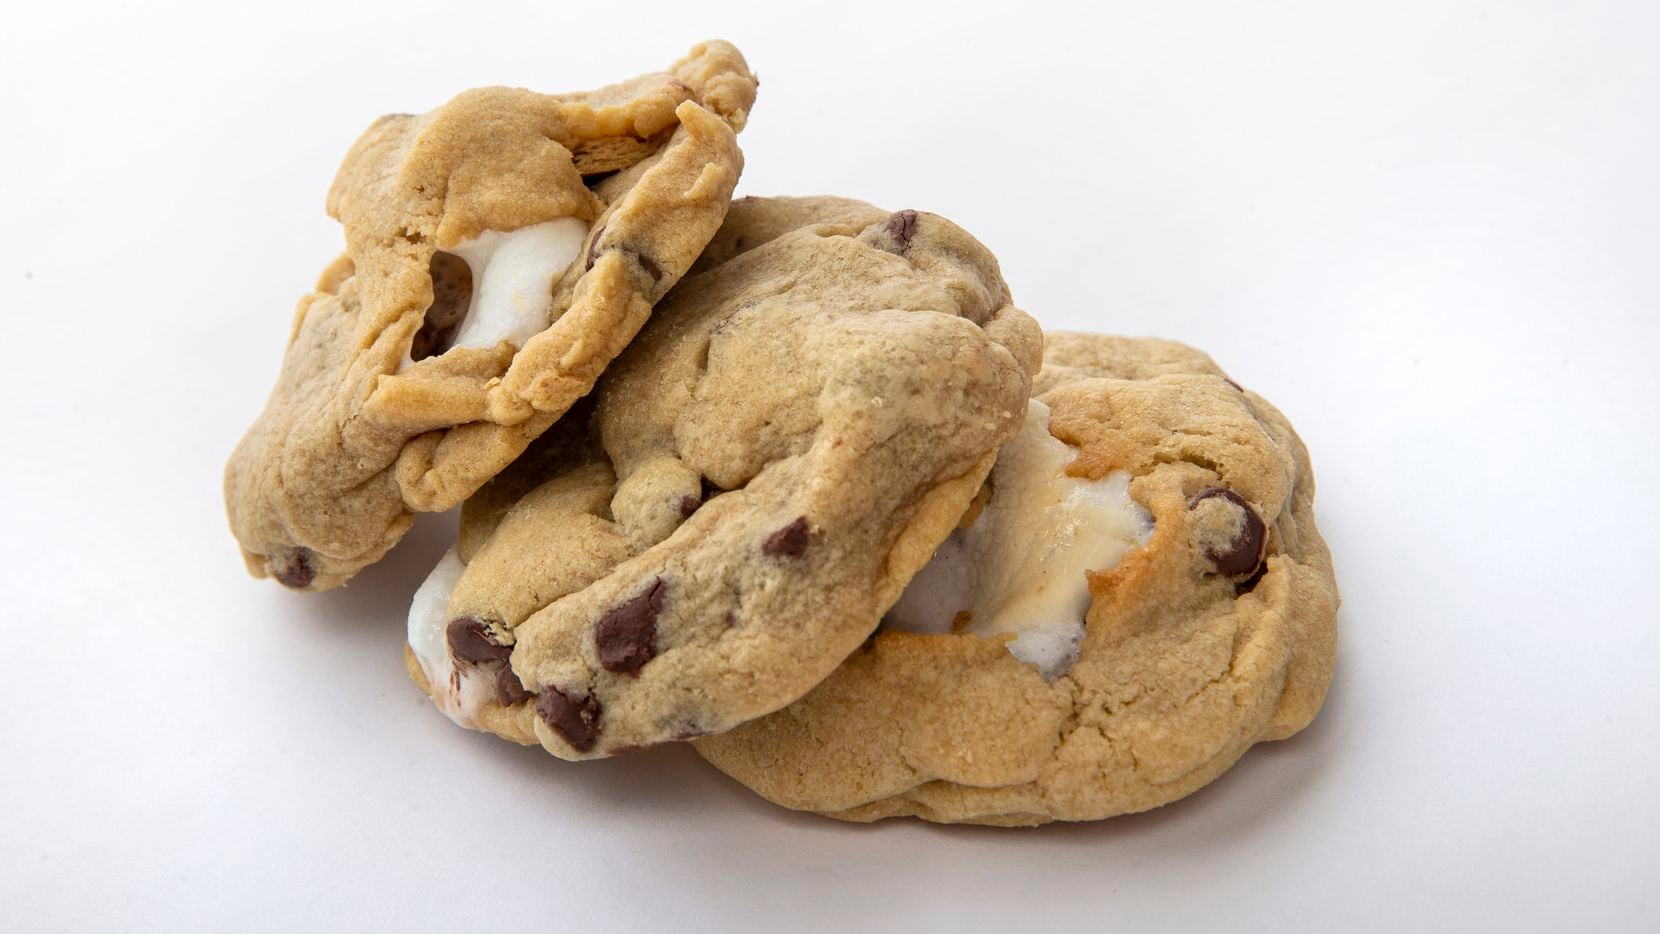 The s'mores chocolate chip cookie made by Luna Hartgrove won second place in the kid's...